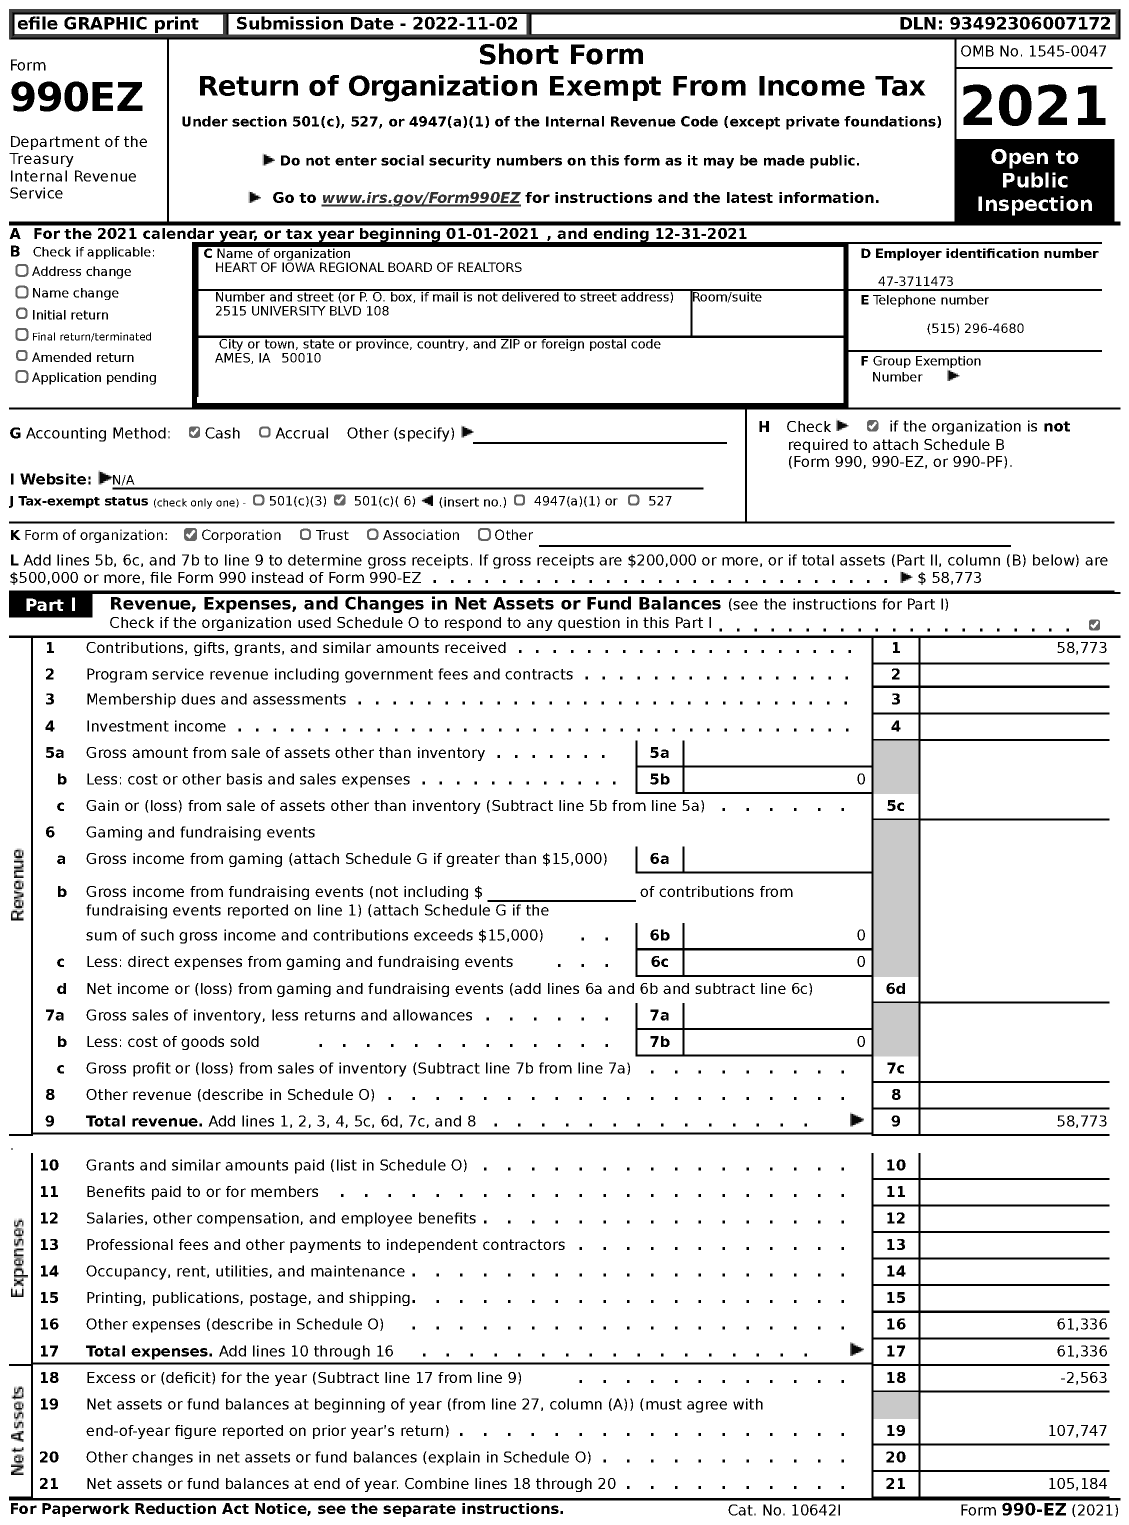 Image of first page of 2021 Form 990EZ for Heart of Iowa Regional Board of Realtors